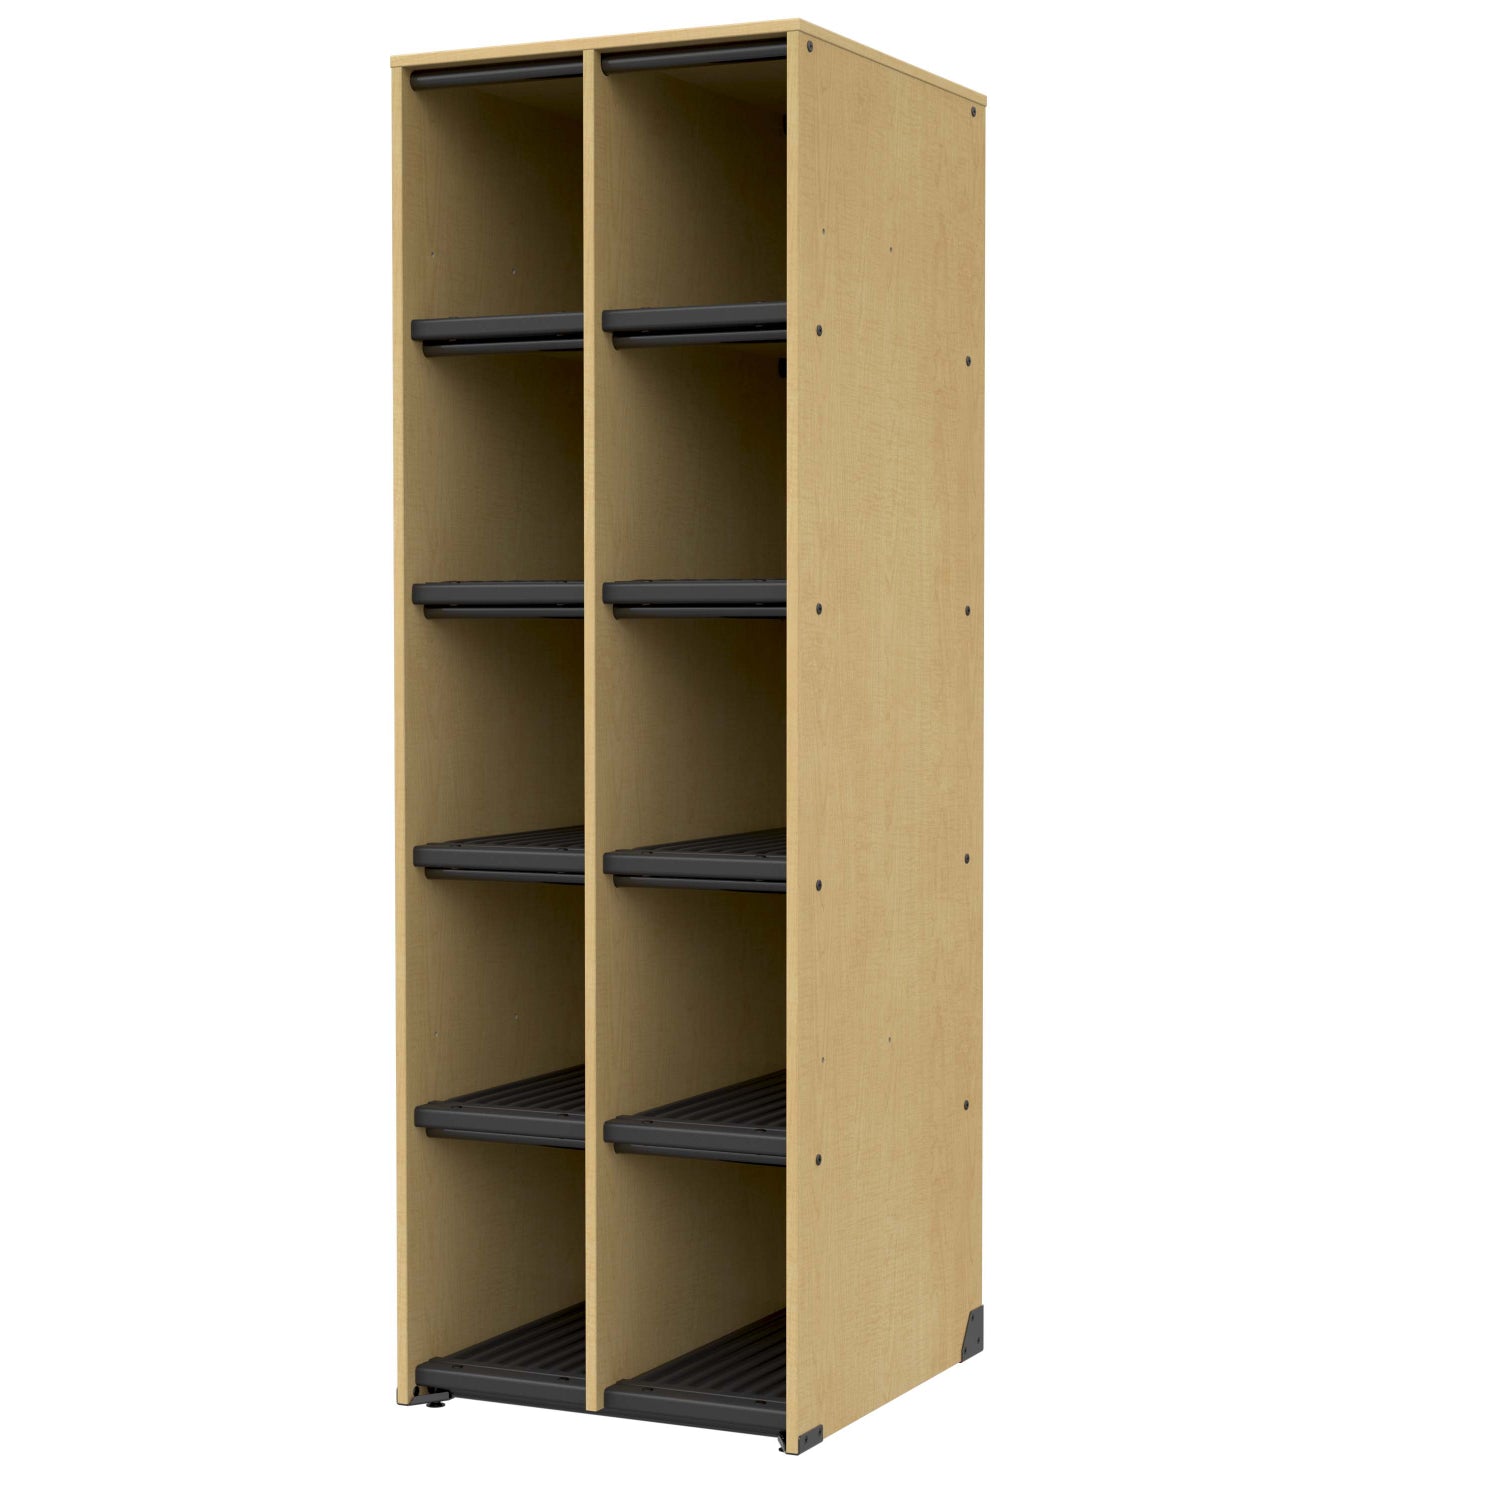 Bandstor™ 10 Compartment Woodwind/Brass Storage, 84"H x 29.25"D